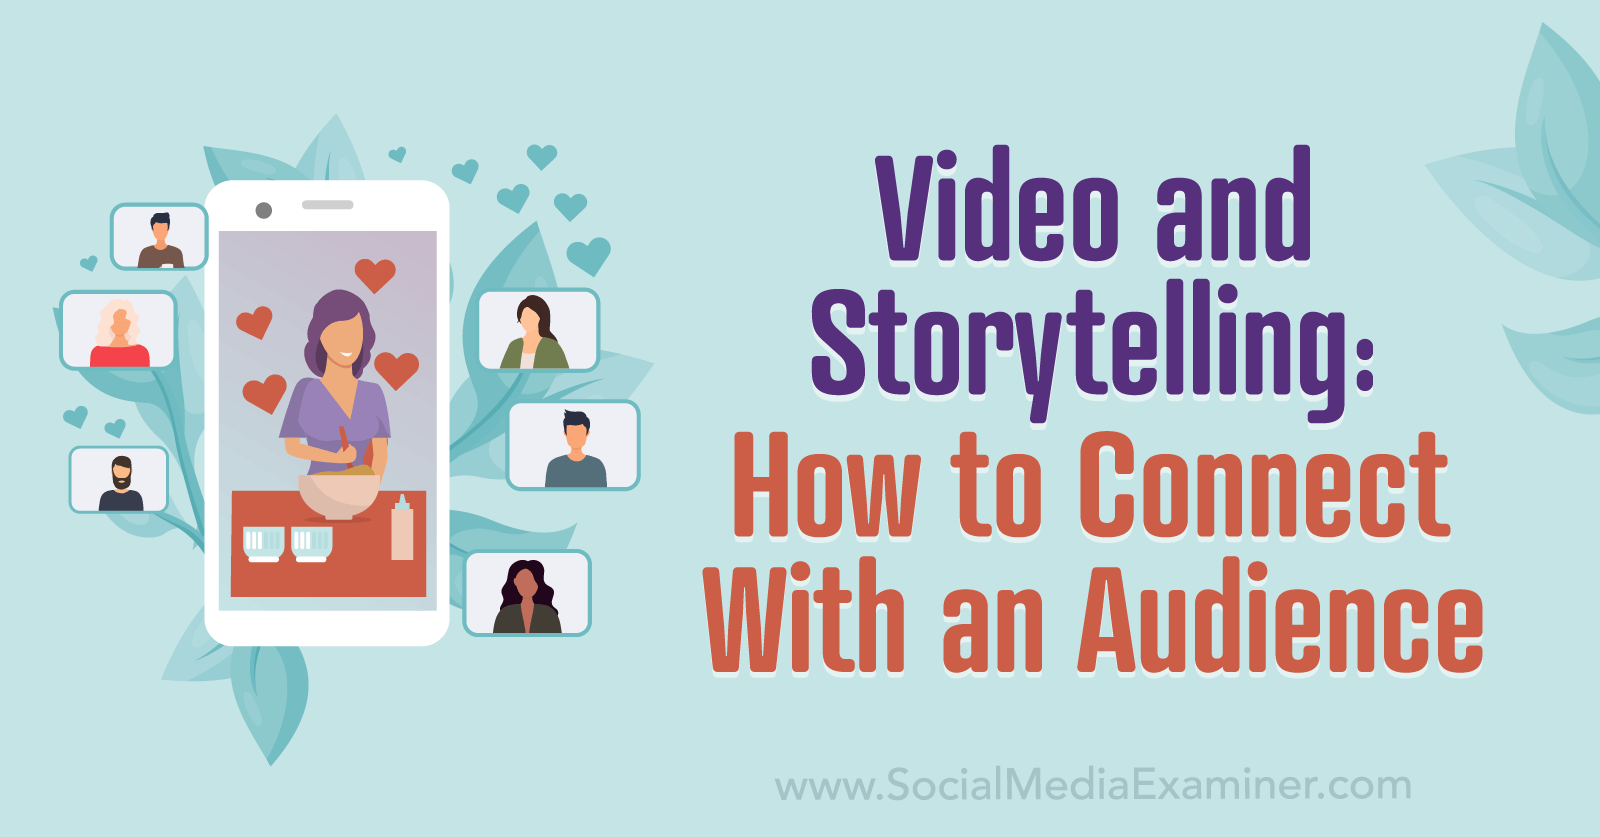 Video and Storytelling: How to Connect With an Audience by Social Media Examiner